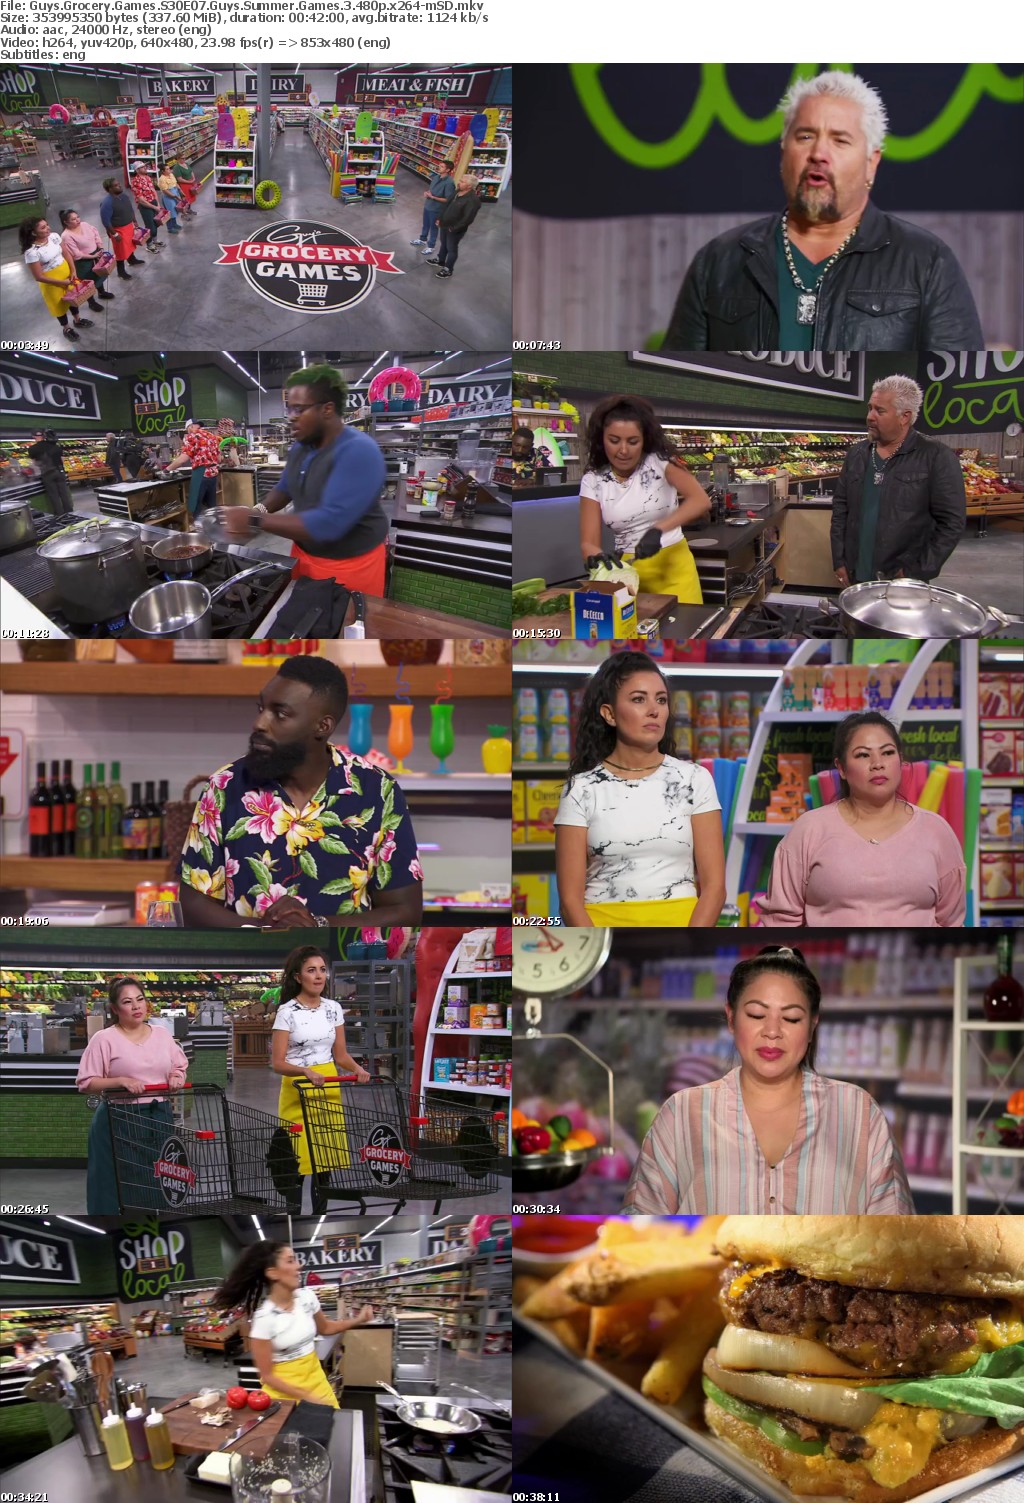 Guys Grocery Games S30E07 Guys Summer Games 3 480p x264-mSD